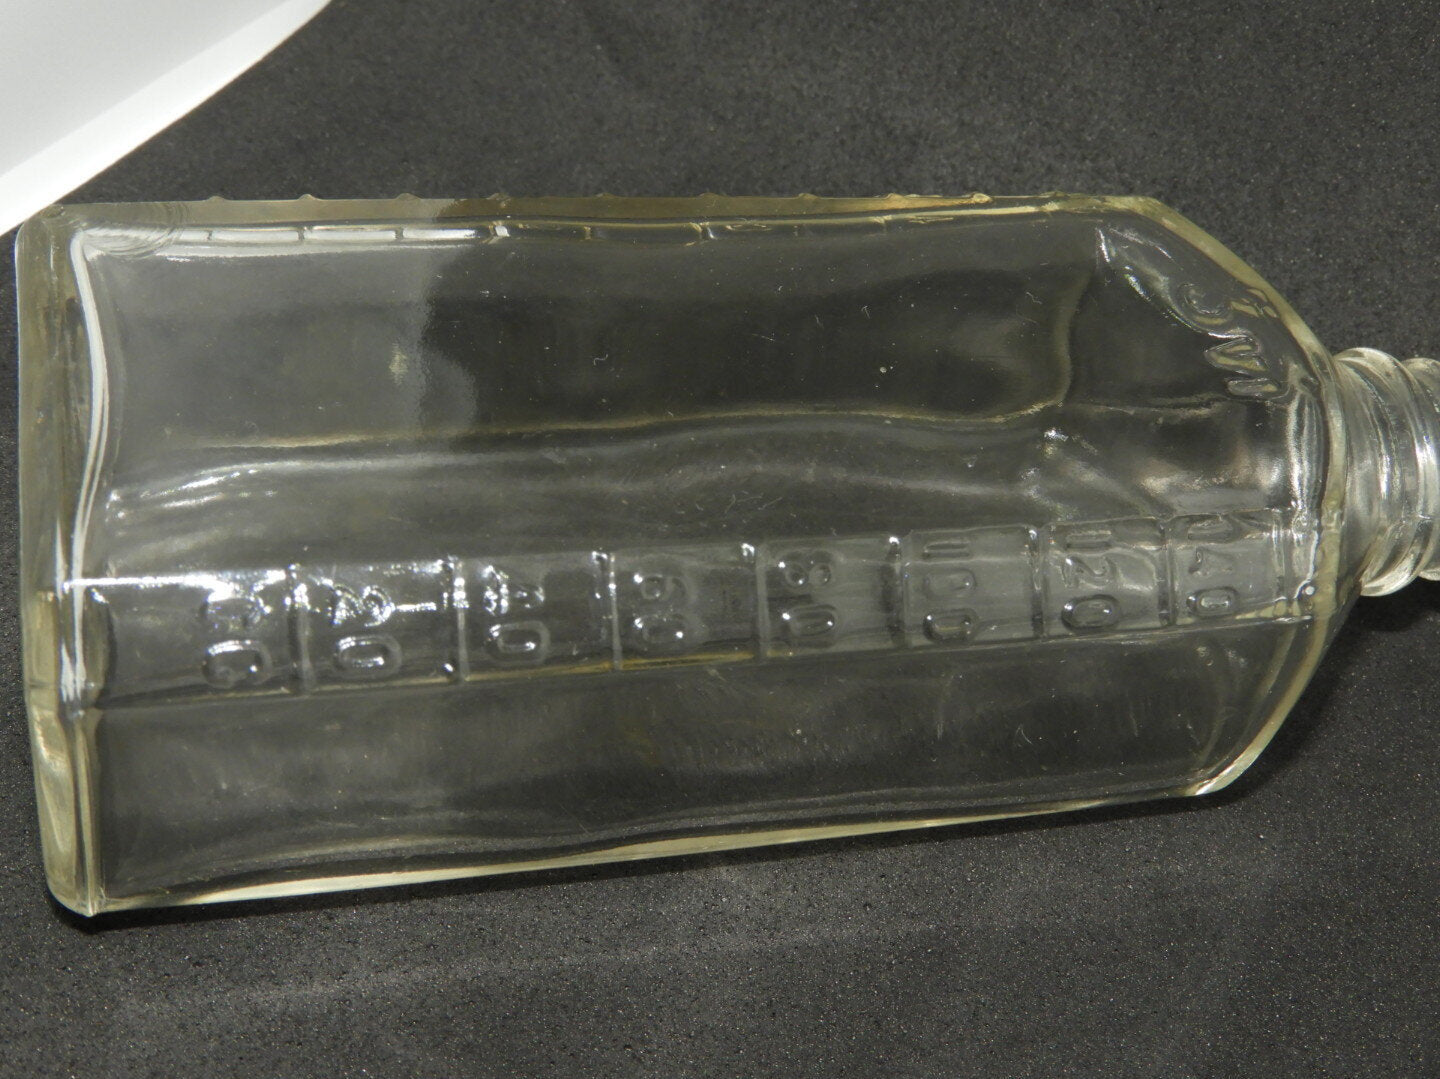 Vintage 6 oz Clear Glass Apothecary Bottle